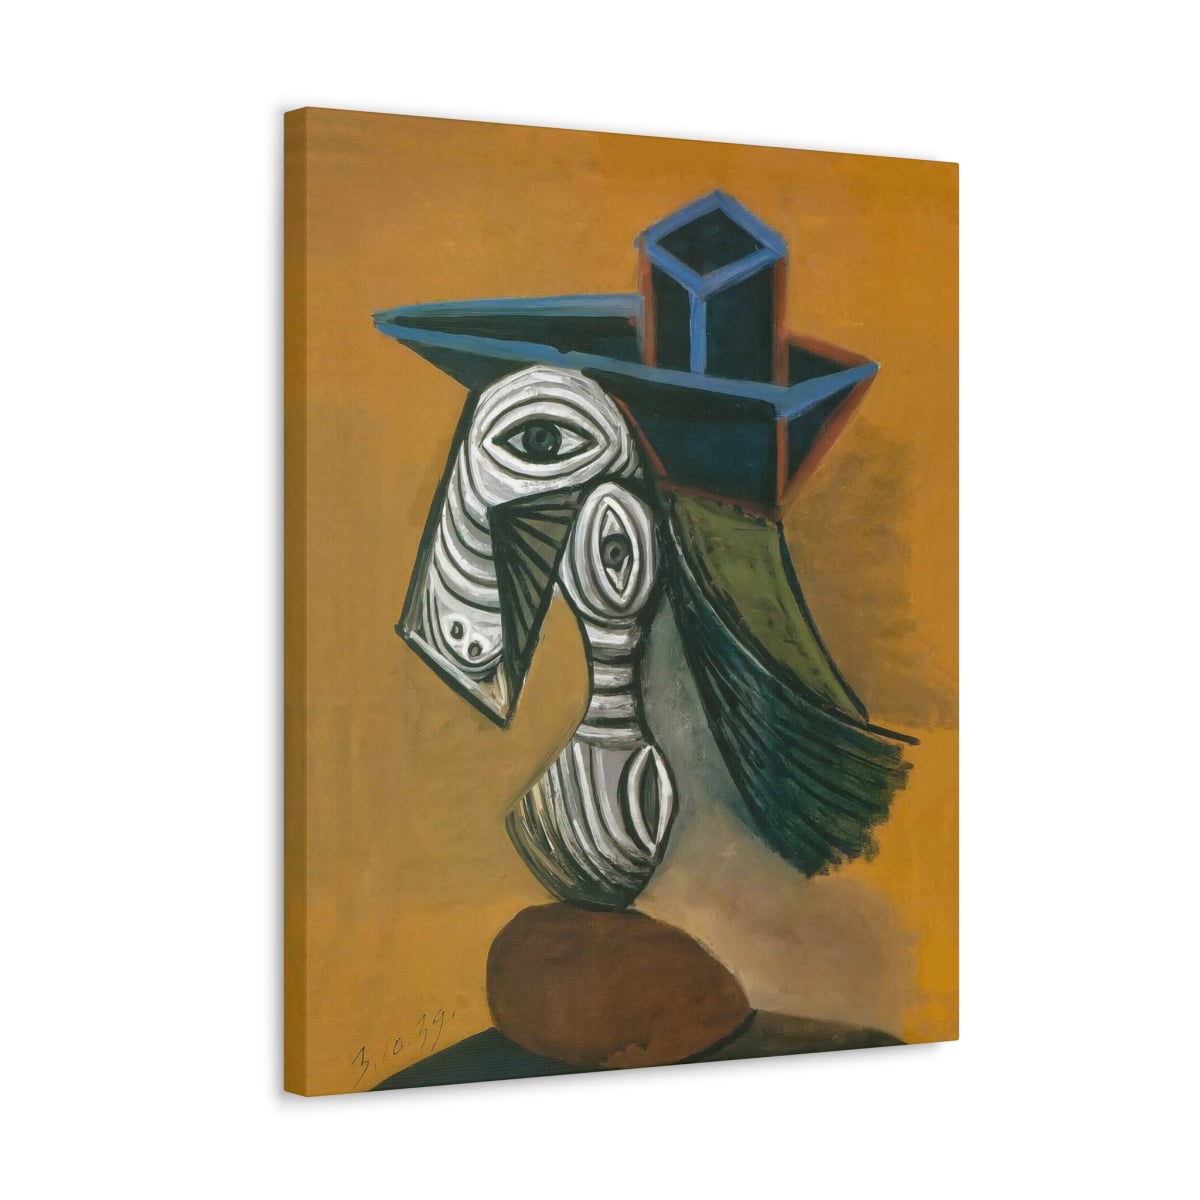 Pablo Picasso's Woman with a Blue Hat Painting